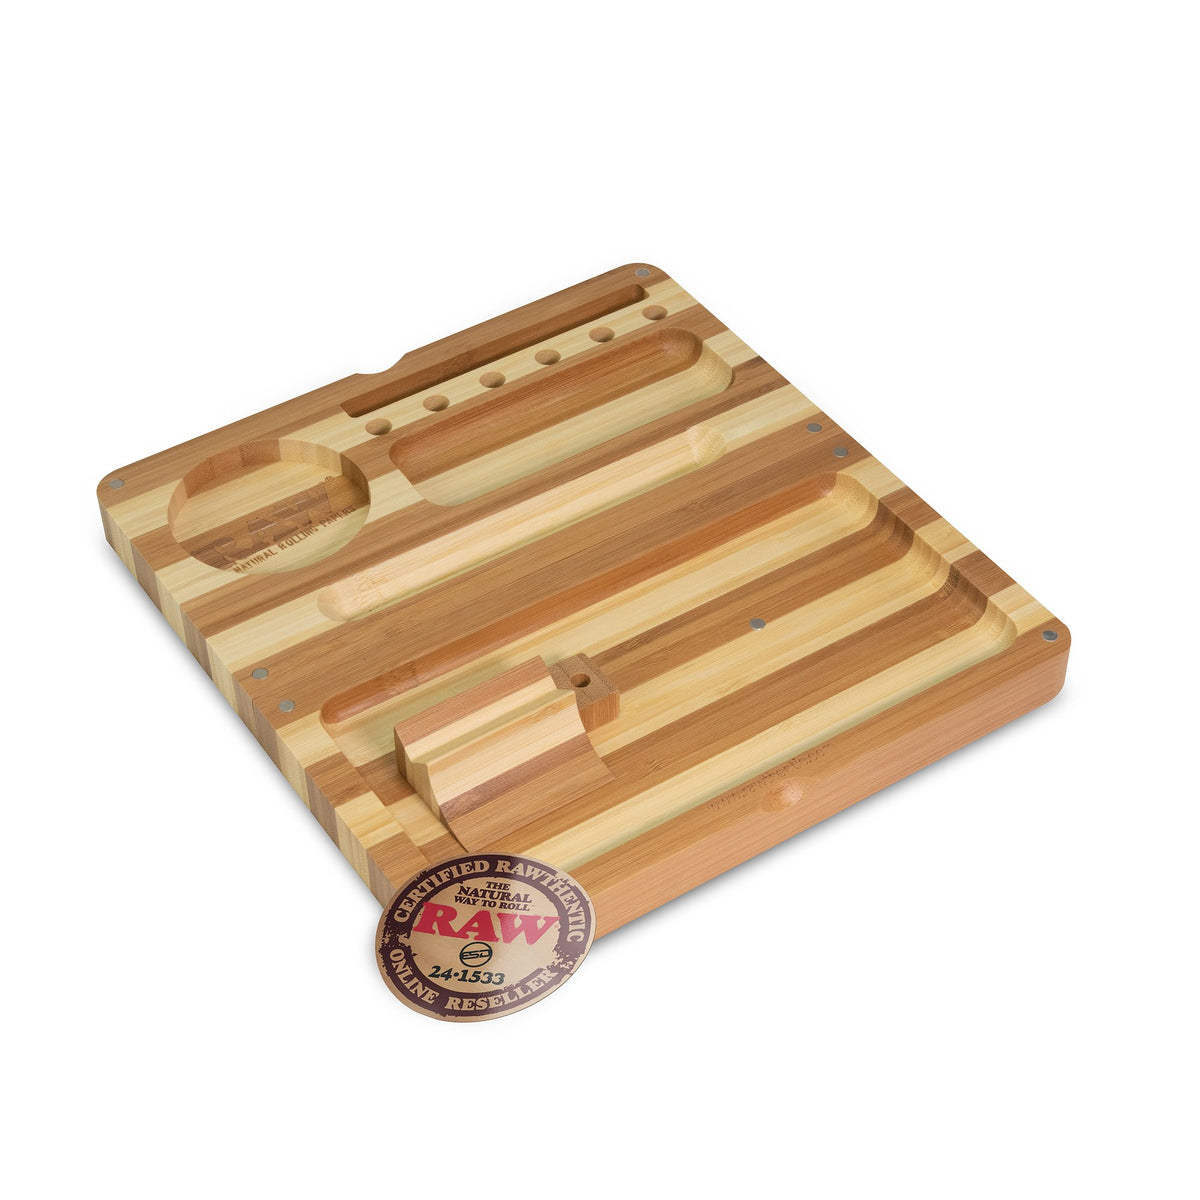 RAW Back Flip Striped Bamboo Rolling Tray Rolling Trays WAR00143-MUSA01 esd-official